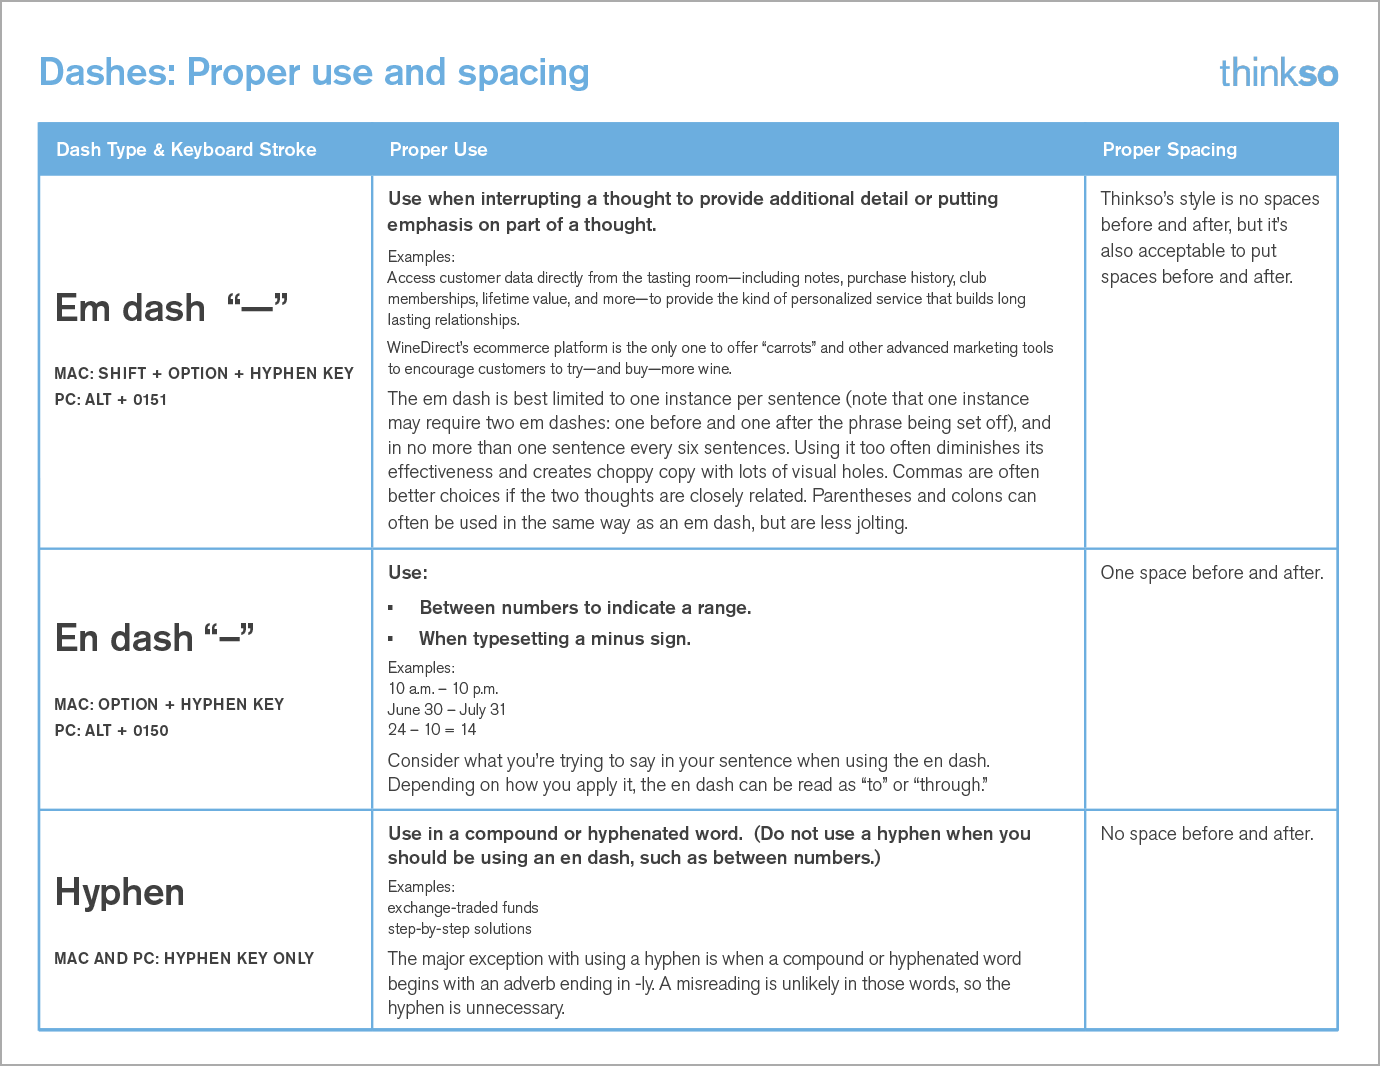 Thinkso's "Dashes: Proper use and spacing" cheat sheet.